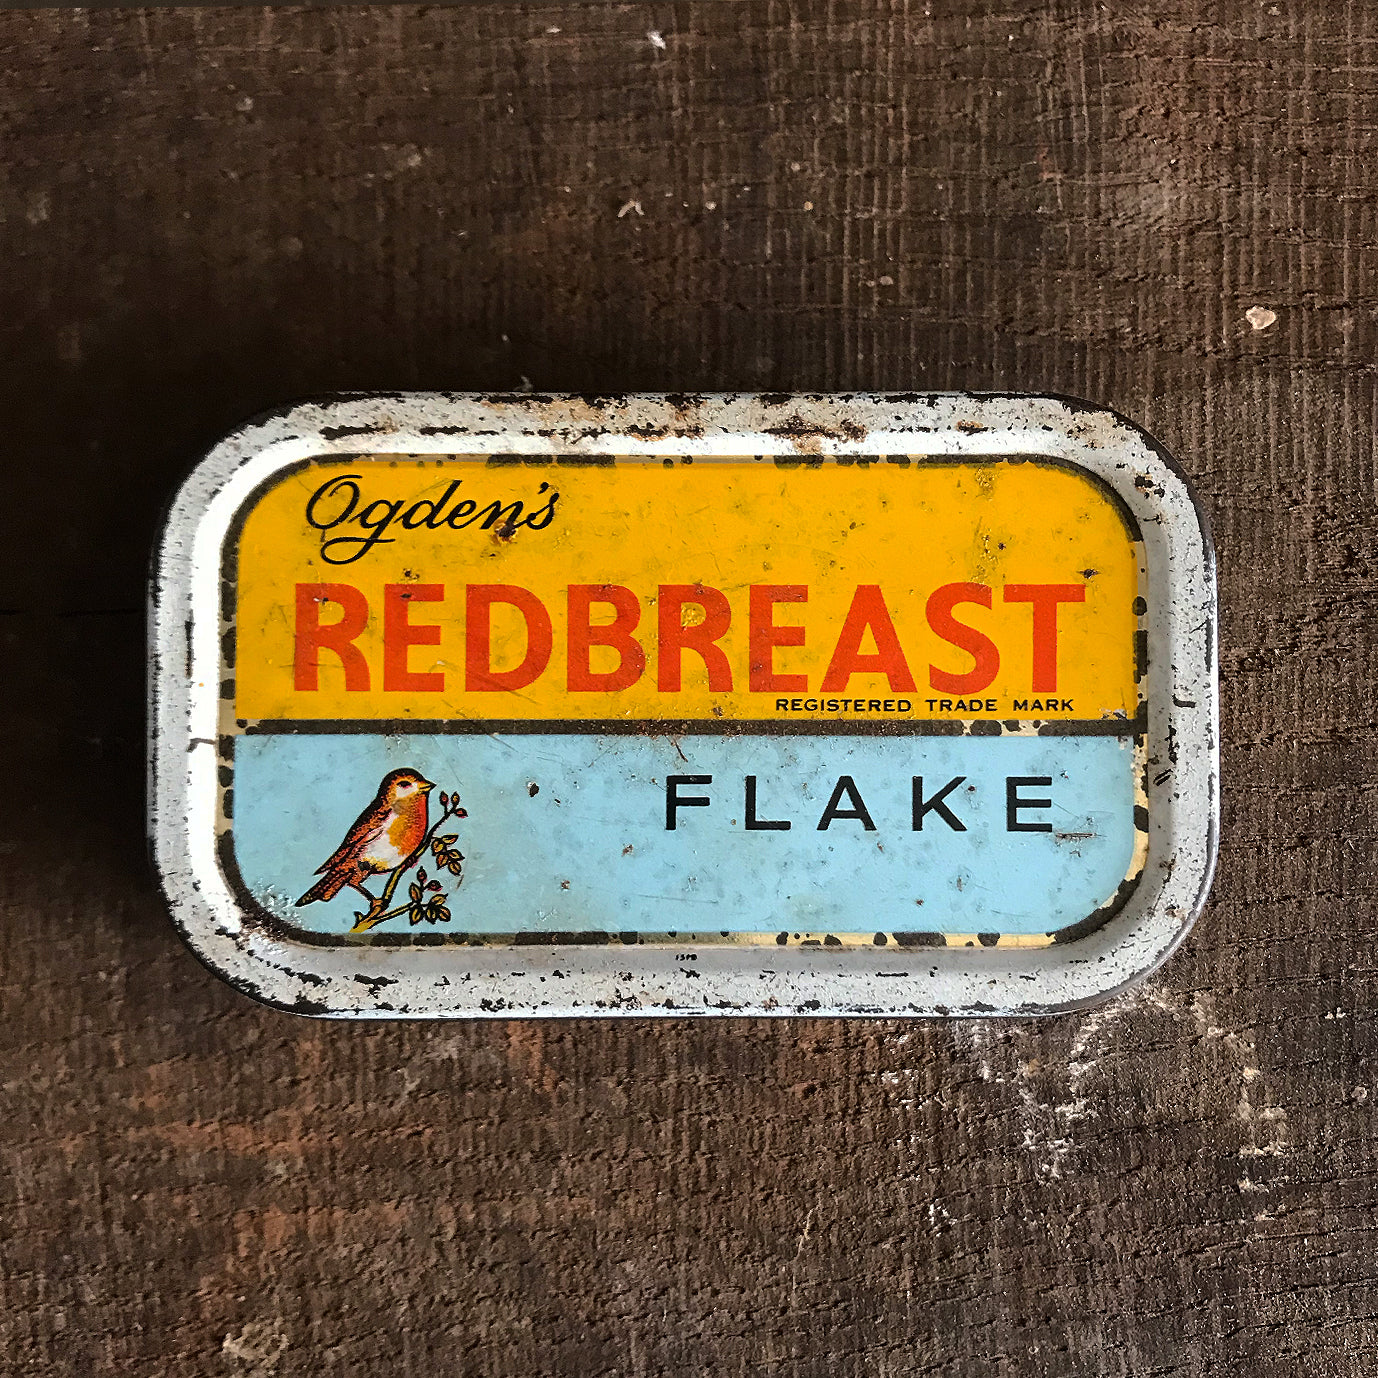 Vintage Ogden's Redbreast Flake Tobacco Tin. Nice popping colours to the front - SHOP NOW - www.intovintage.co.uk